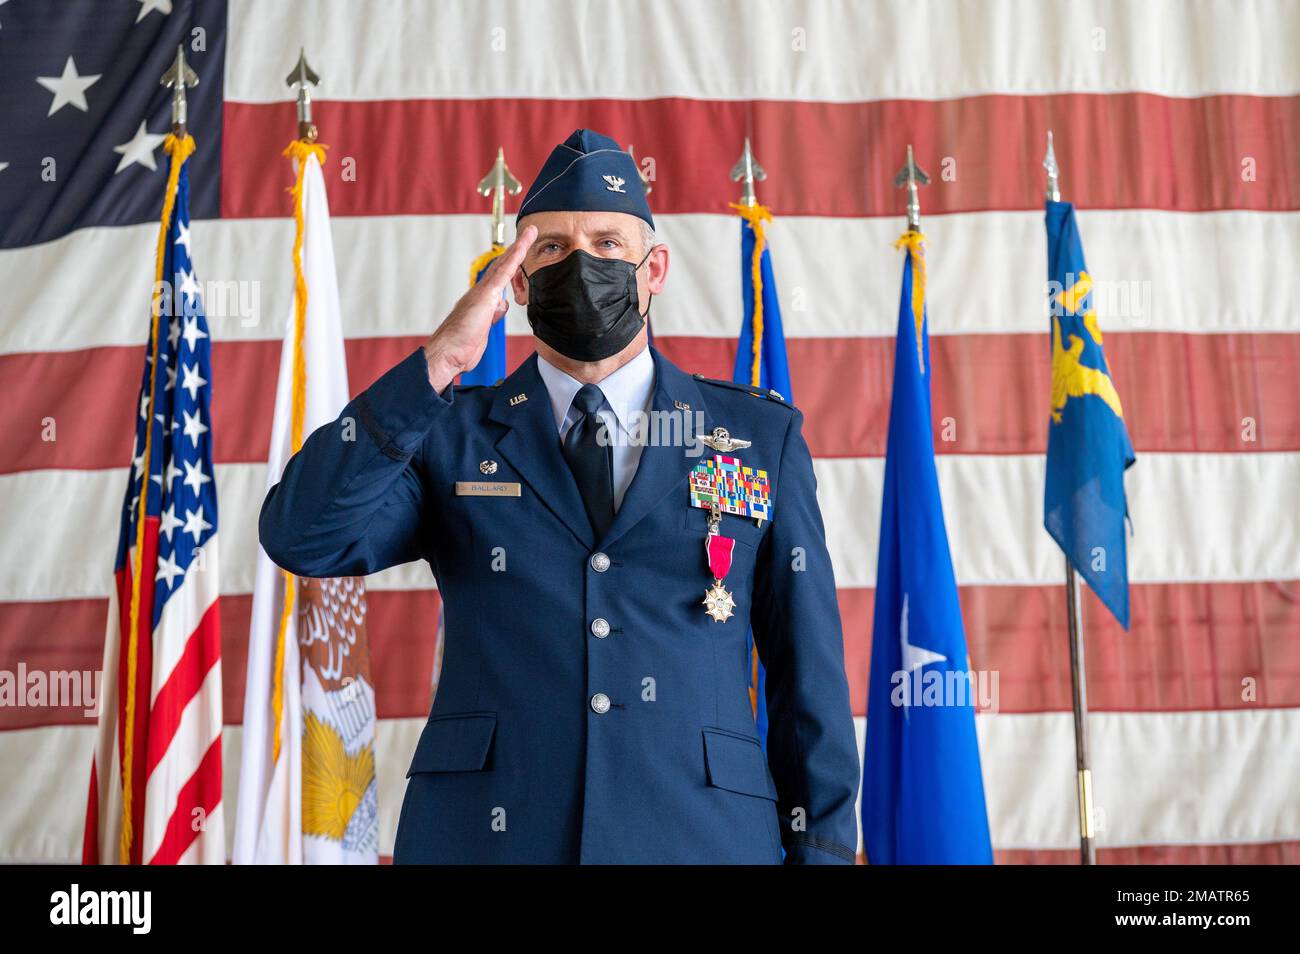 U.S. Air Force Col. Rusty Ballard, the commander of the 182nd Airlift Wing, Illinois Air National Guard, salutes the wing during a change of command ceremony in Peoria, Illinois, June 7, 2022. Outgoing wing commander Col. Daniel McDonough then assumed command of the Illinois Air National Guard from Maj. Gen. Peter Nezamis. Stock Photo